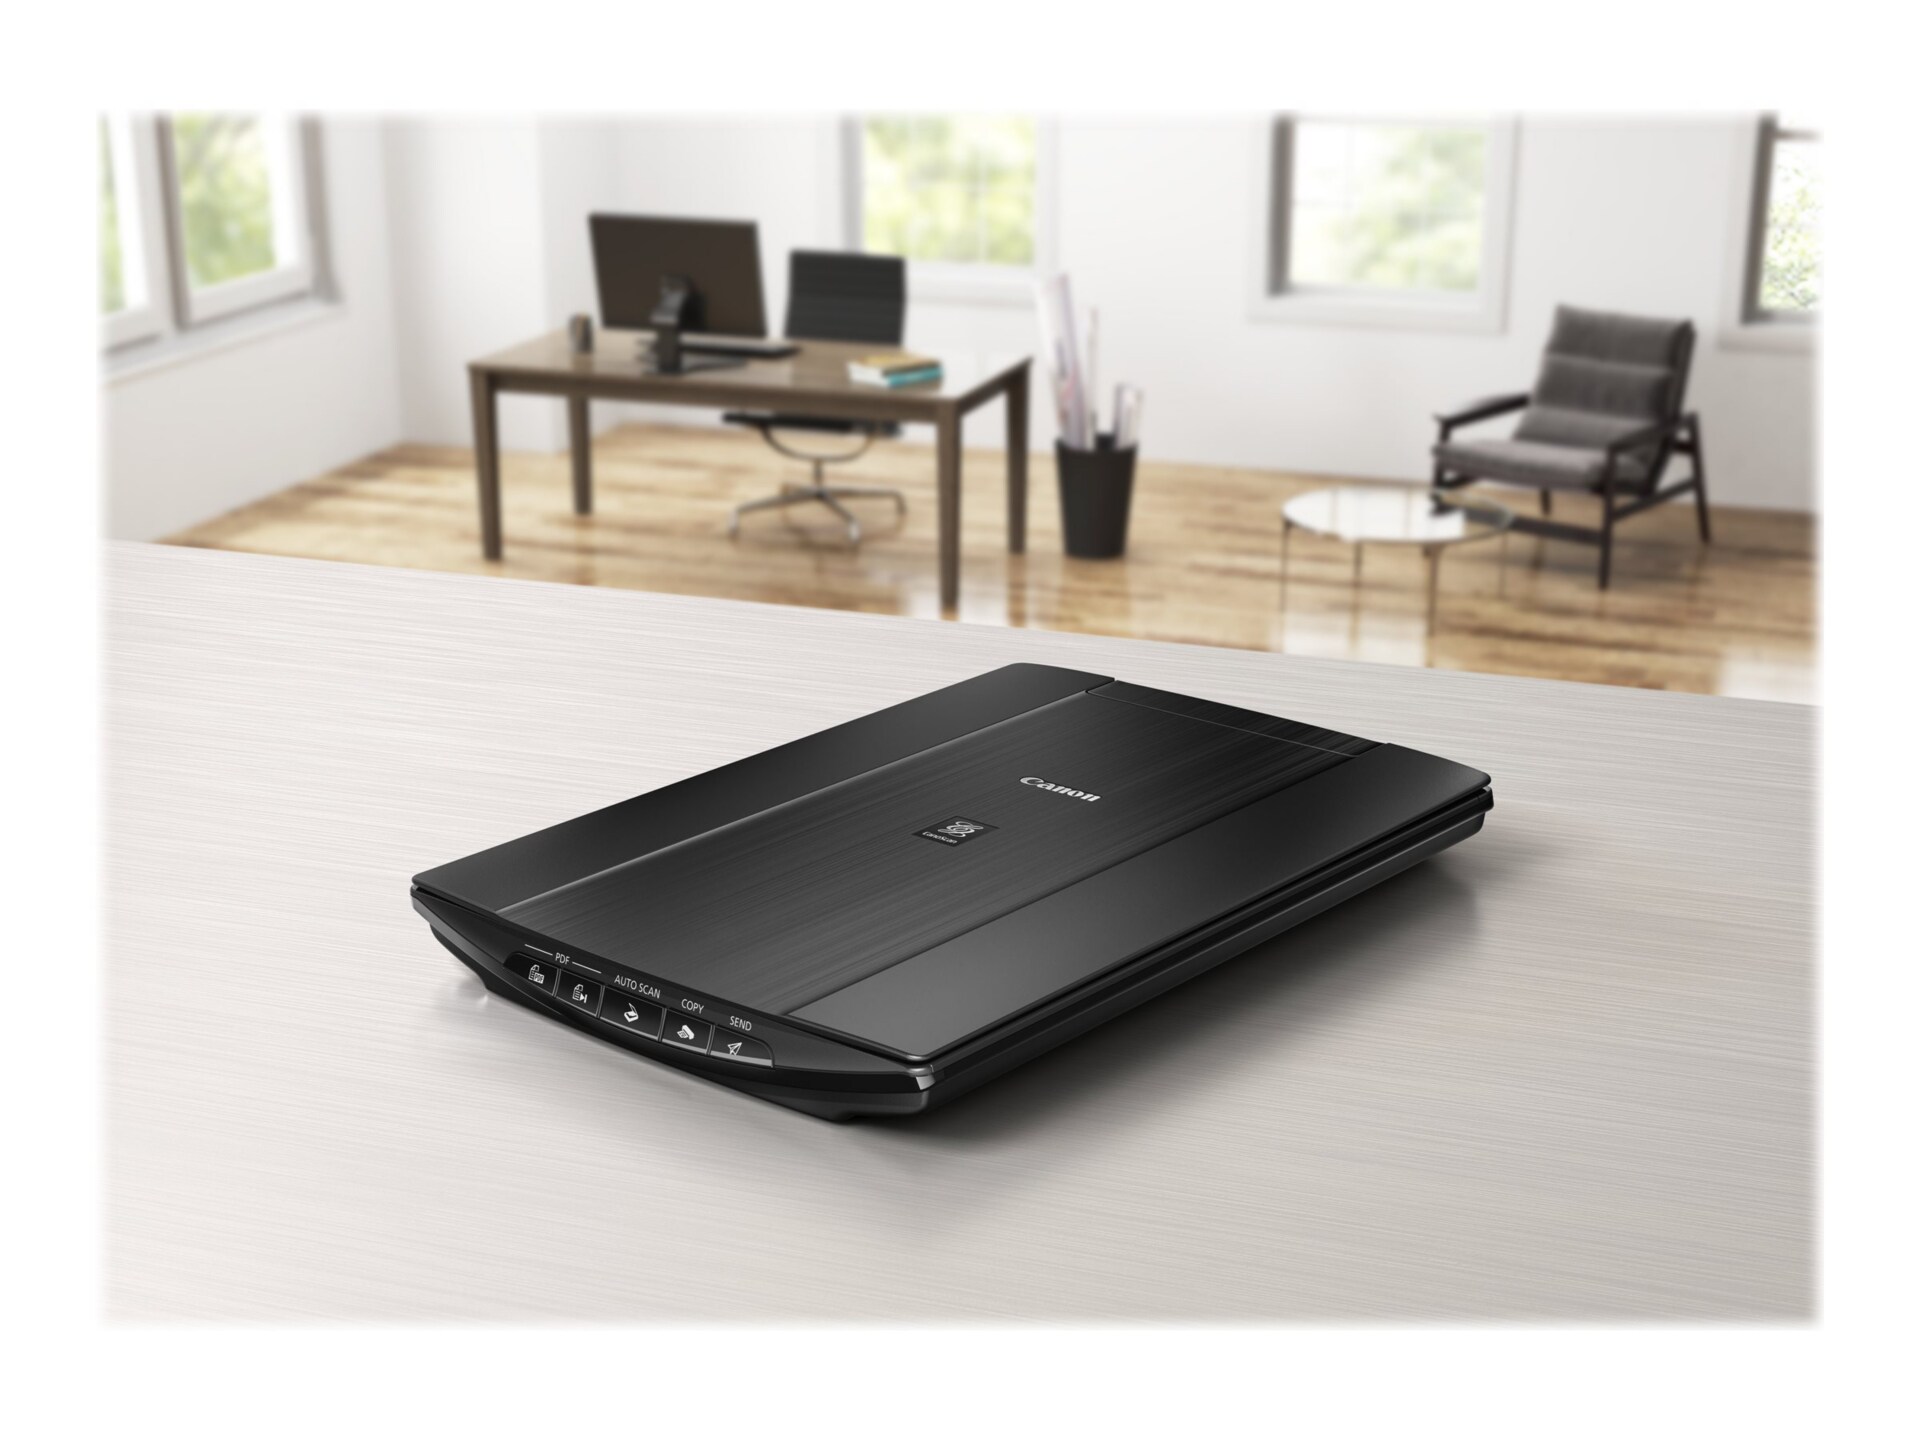 Canon CanoScan LiDE 220 Wired/USB Flatbed Scanner